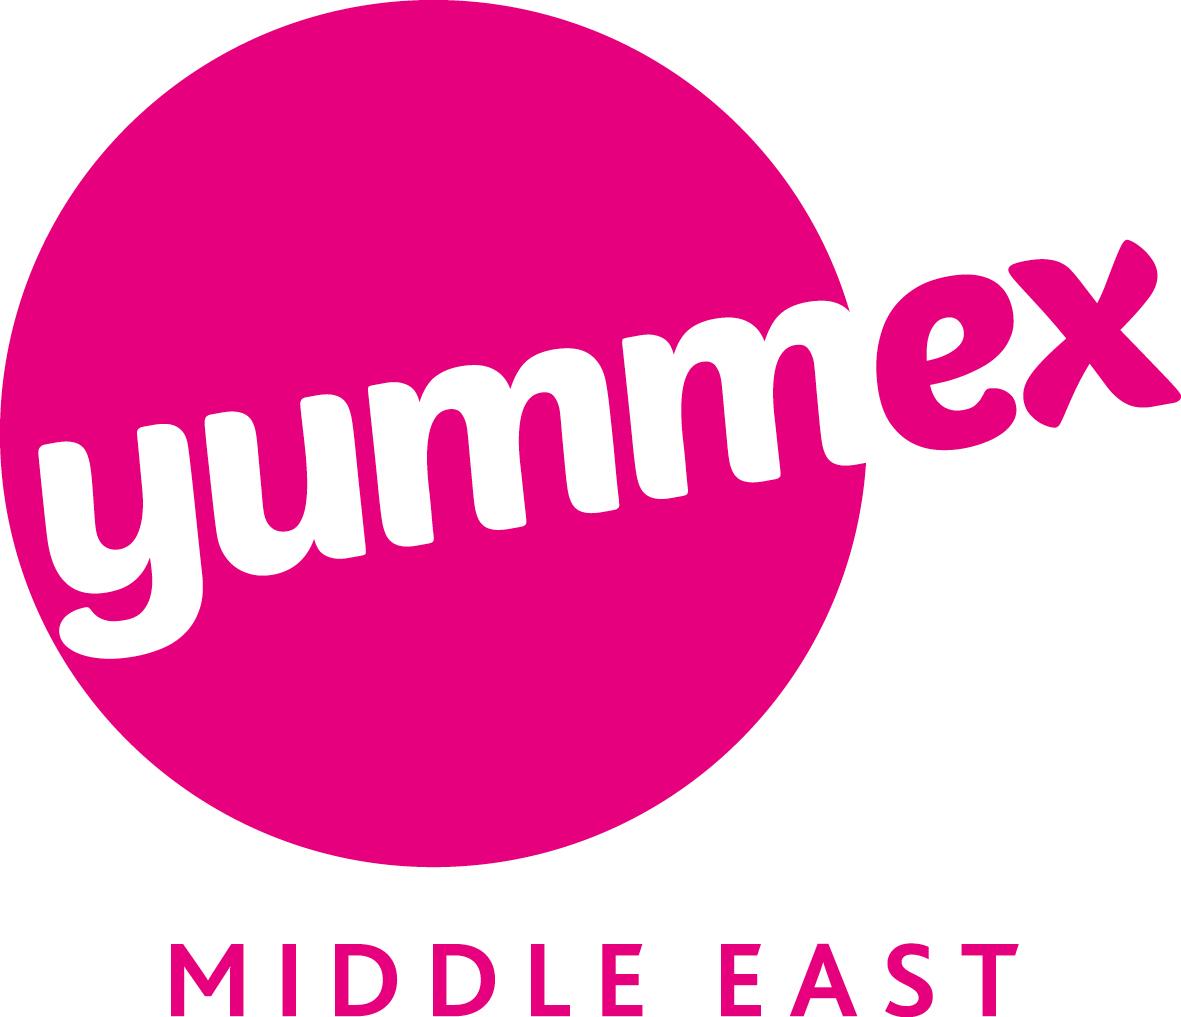 yummex Middle East 2019: The business platform for the sweets and snacks industry in the MENA region.